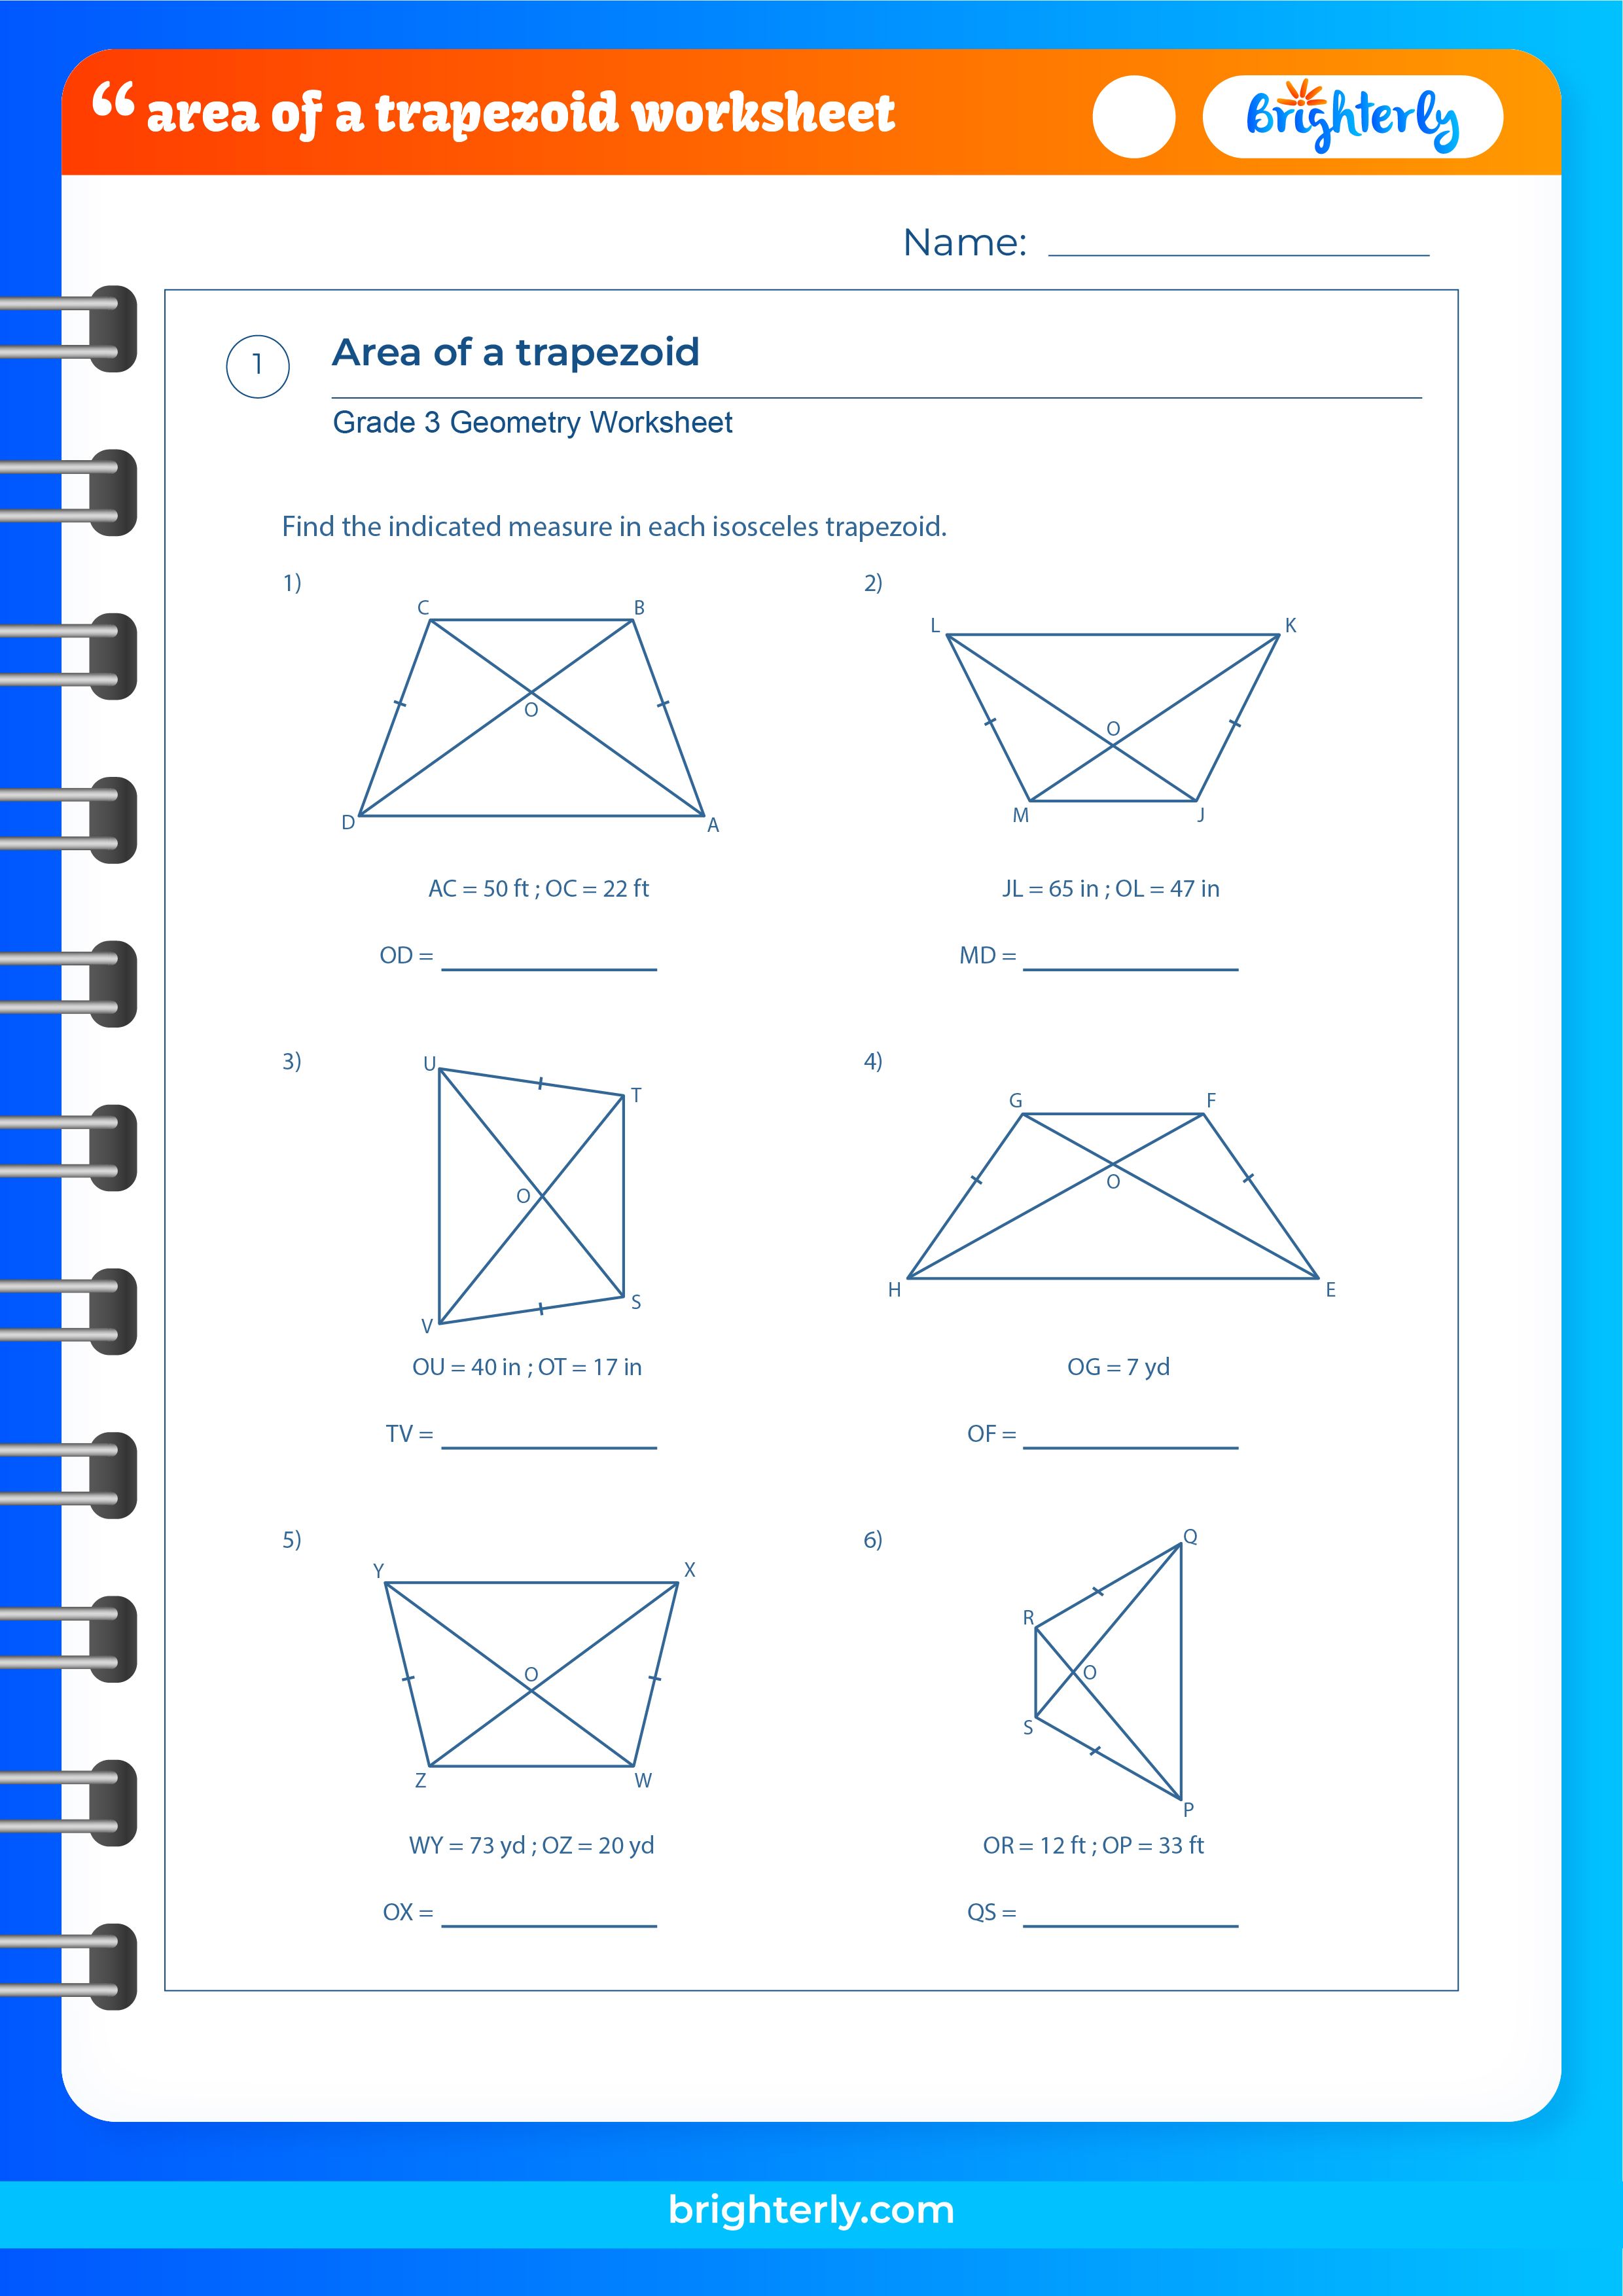 free-area-of-a-trapezoid-worksheets-for-kids-pdfs-brighterly